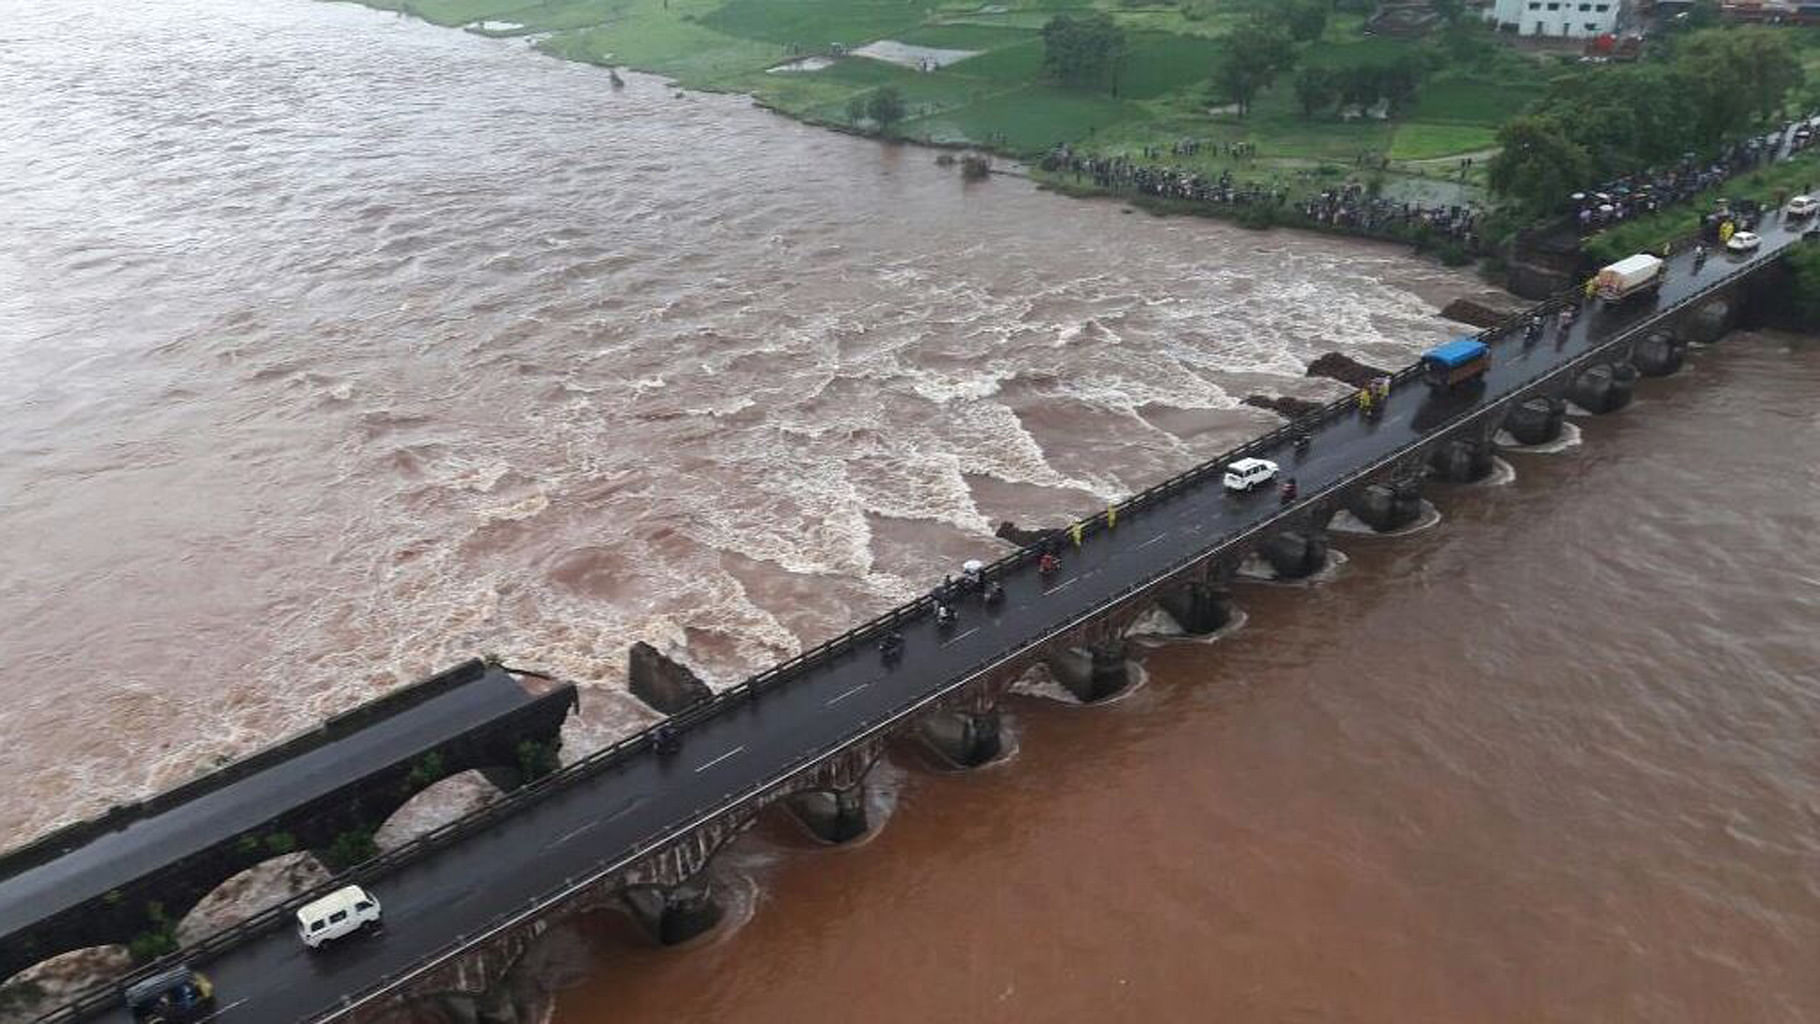 The view of the collapsed bridge at Mahad from an Indian Navy Sea King helicopter in rescue/relief operations. (Photo Courtesy: Twitter/<a href="https://twitter.com/ShivAroor">@<b>ShivAroor</b></a><a href="https://twitter.com/ShivAroor"> </a>)